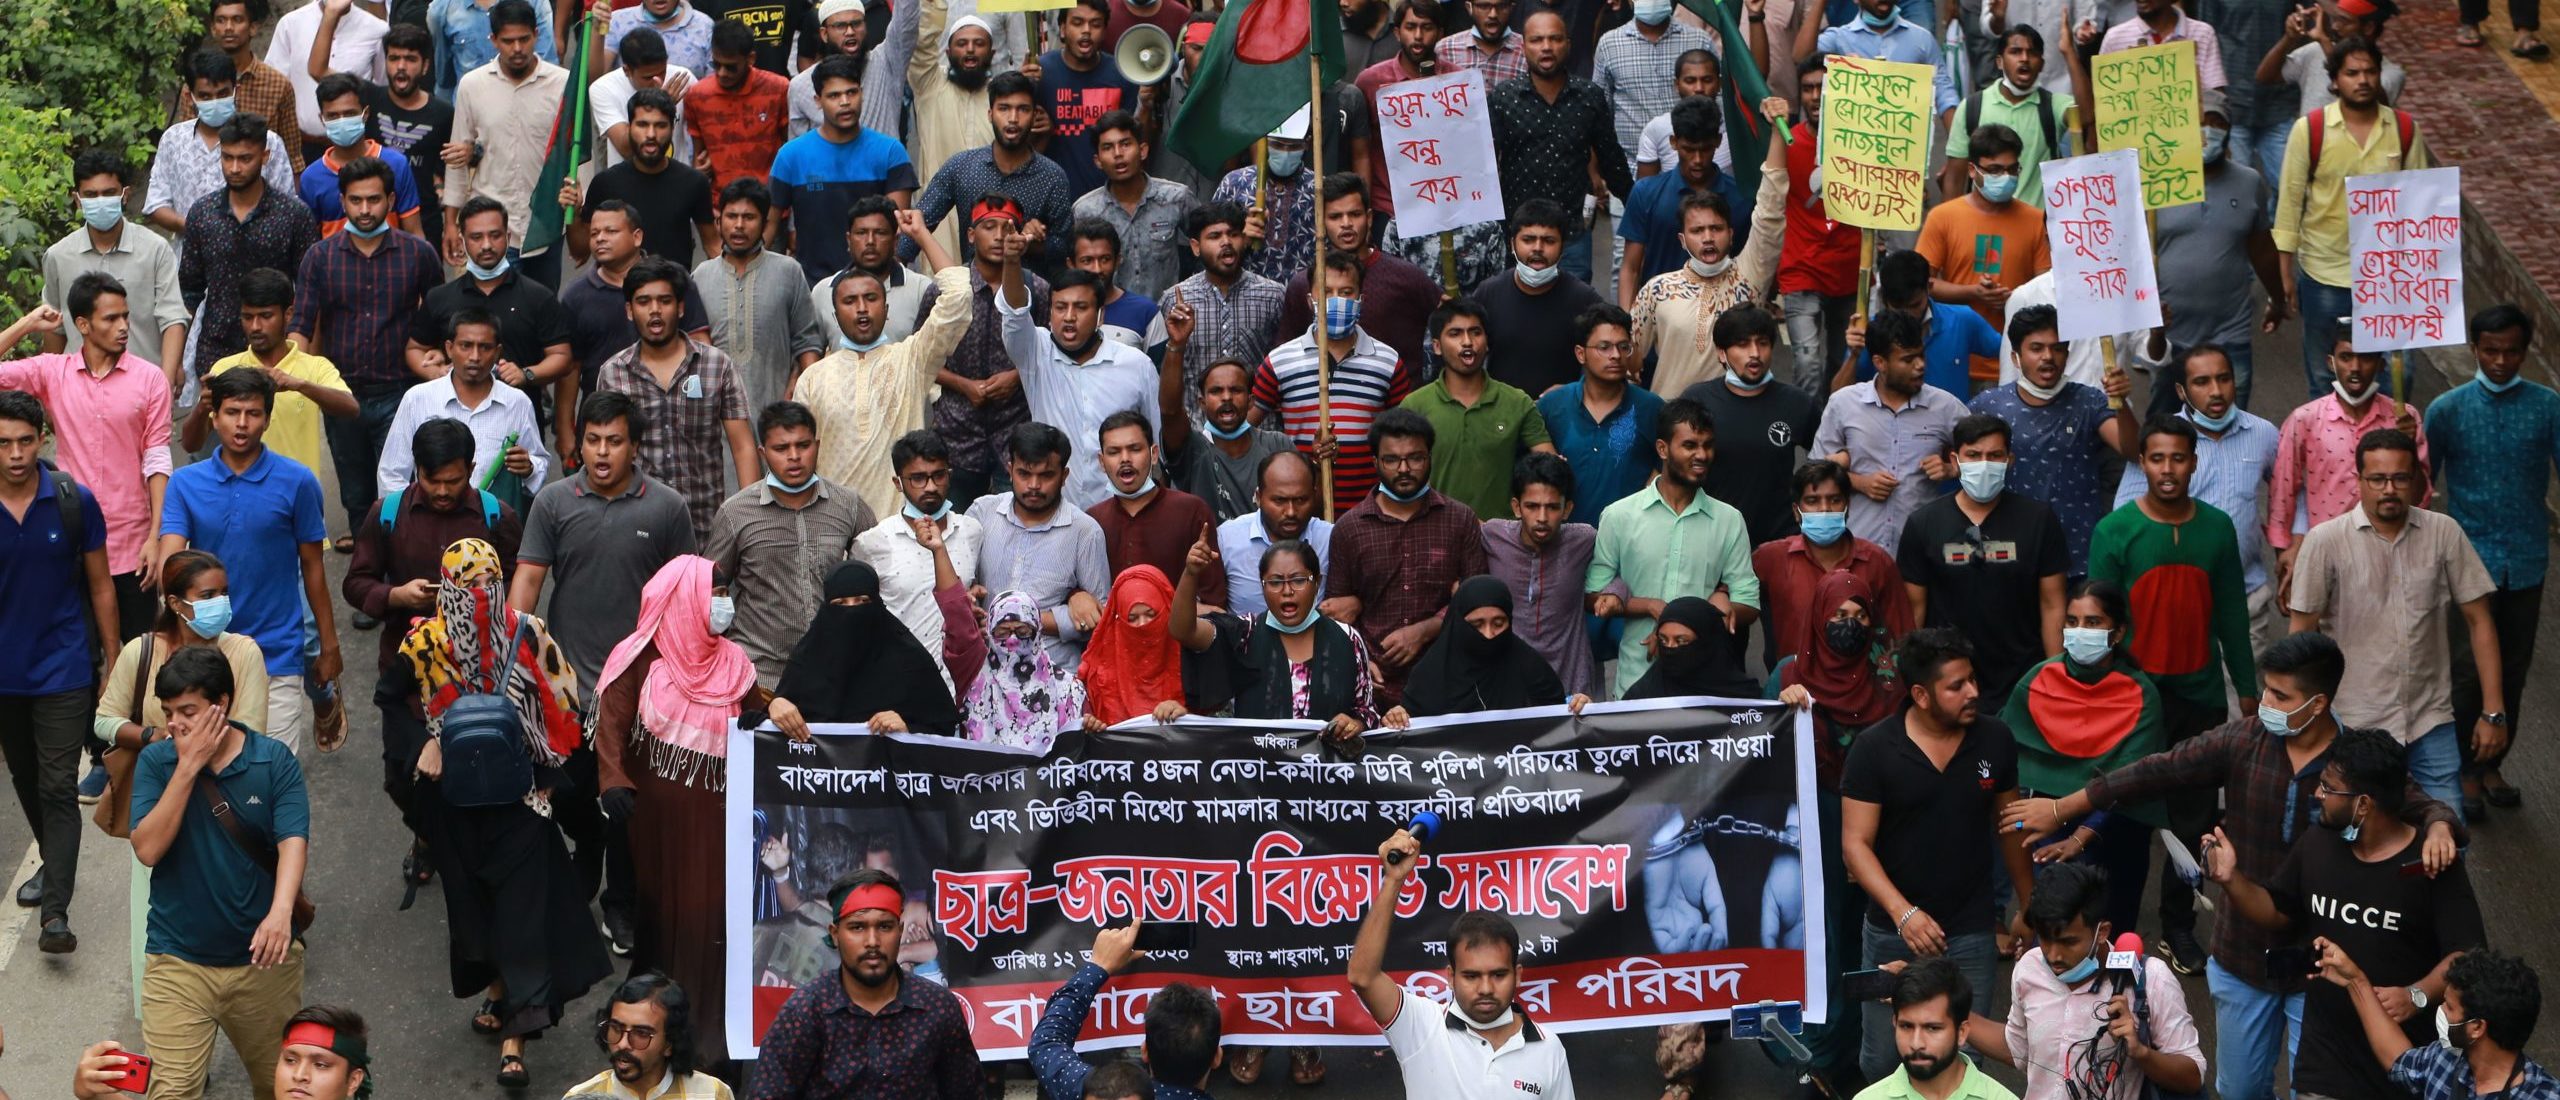 Bangladesh Approves Death Penalty For Rapists The Daily Caller 1253